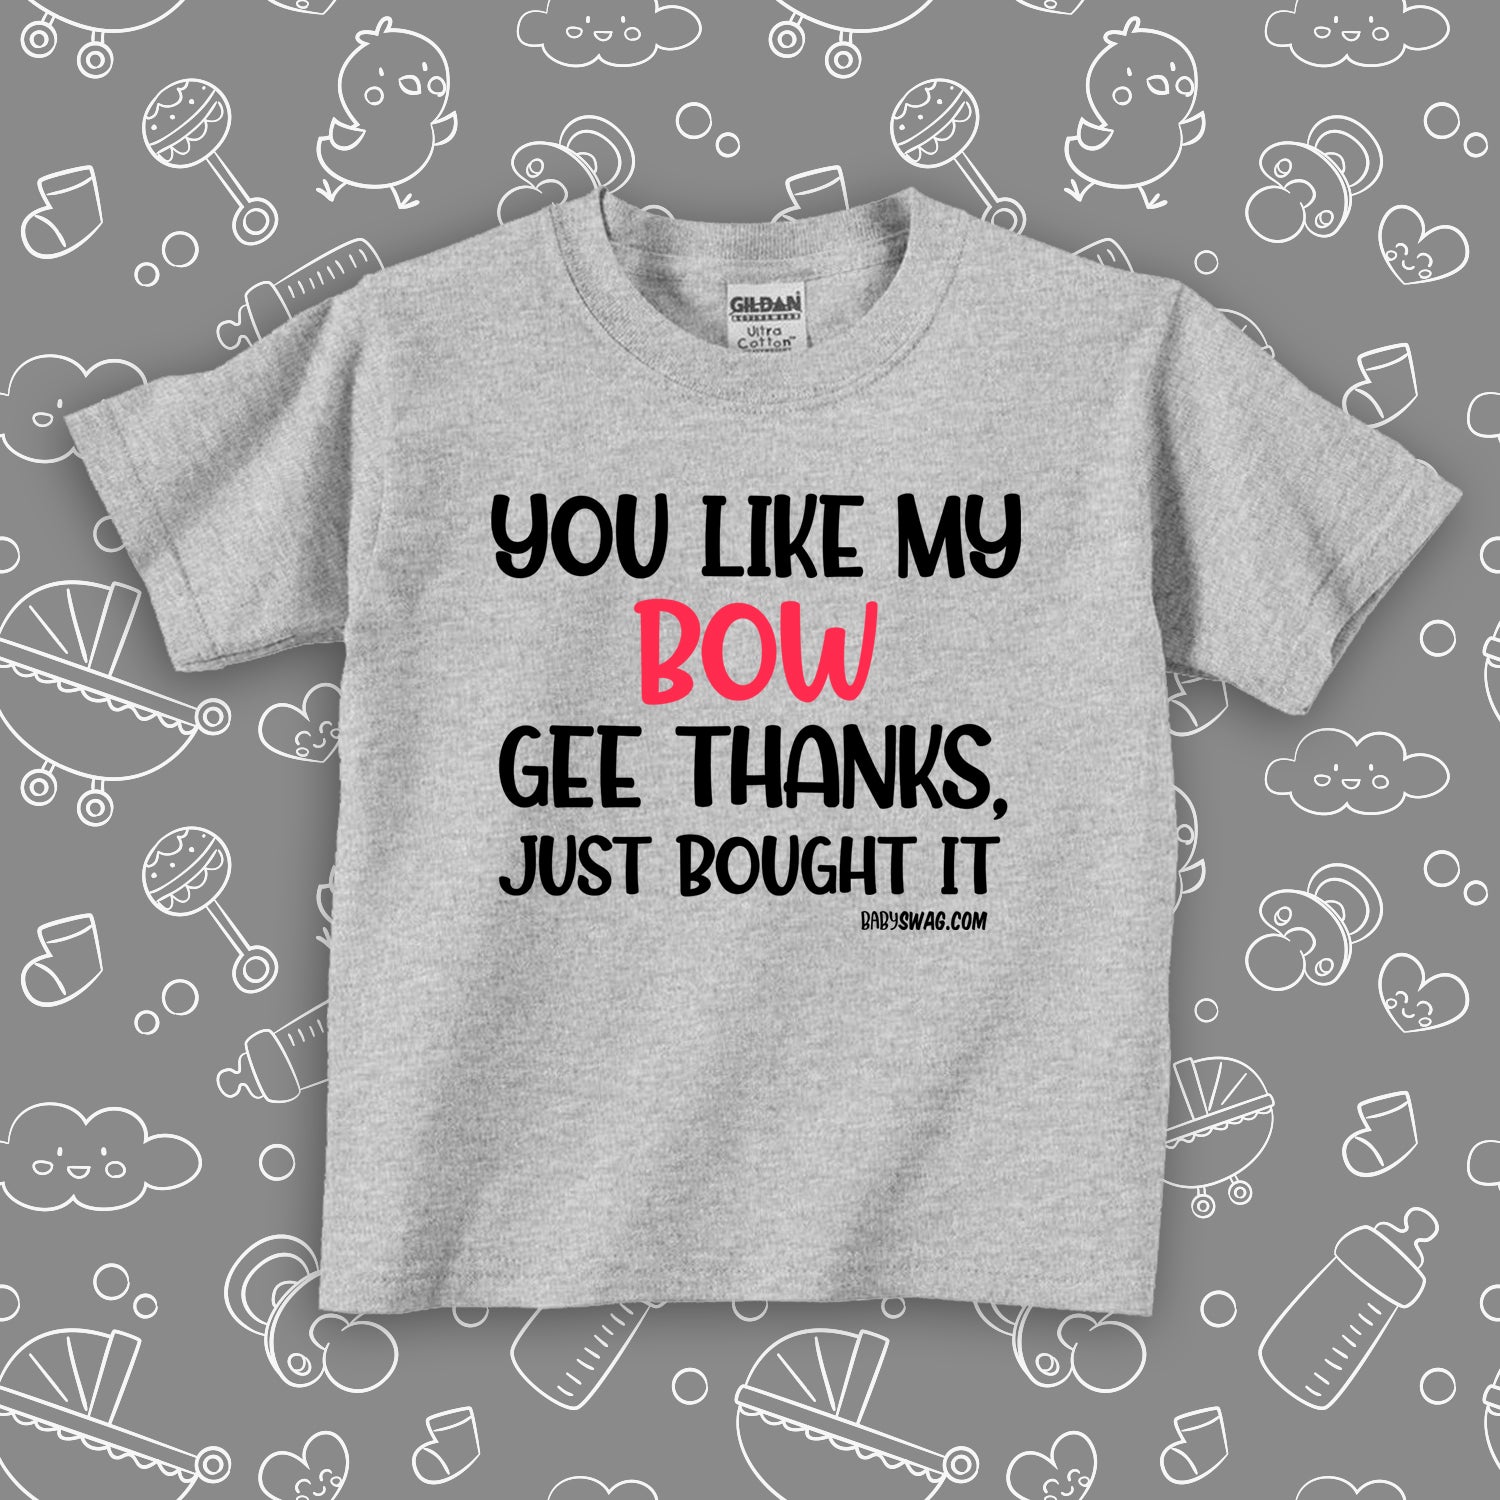 "You Like My Bow" toddler girl shirt in grey. 